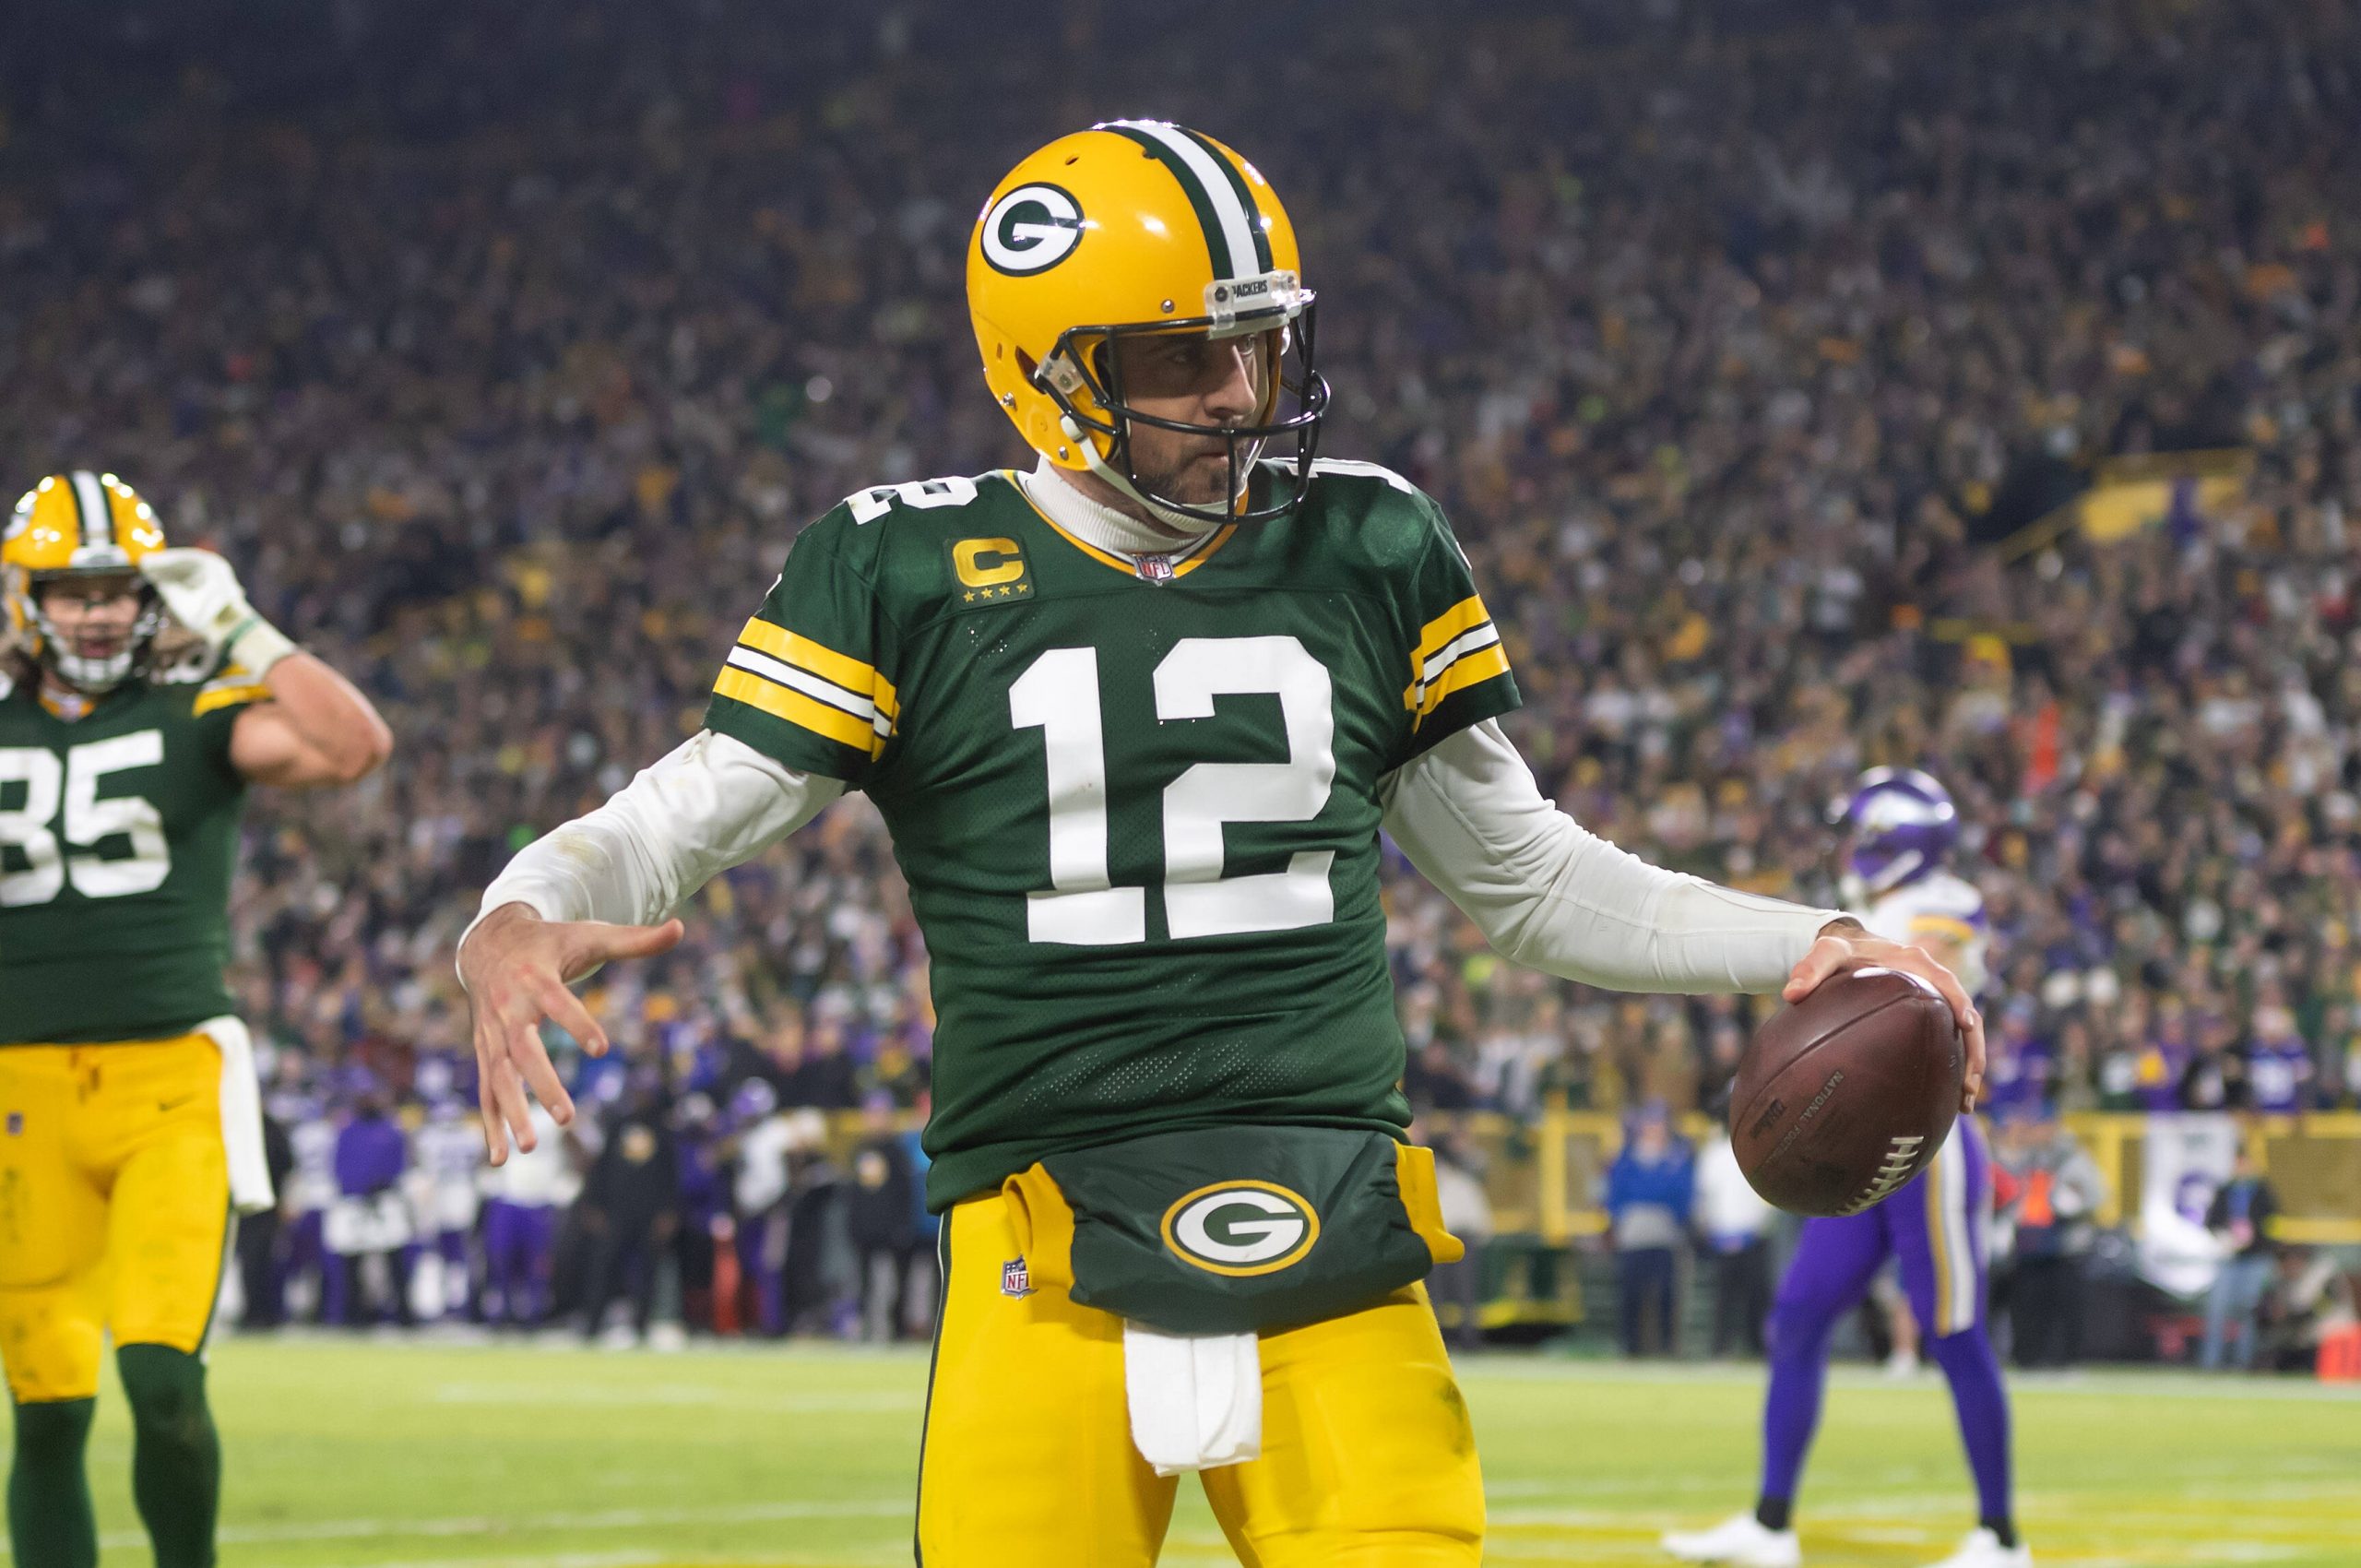 January 1, 2023: Green Bay Packers quarterback Aaron Rodgers 12 celebrates scoring a touchdown during a game against the Minnesota Vikings in Green Bay, Wisconsin. /Cal Media Green Bay United States of America - ZUMAc04_ 20230101_zaf_c04_315 Copyright: xKirstenxSchmittx